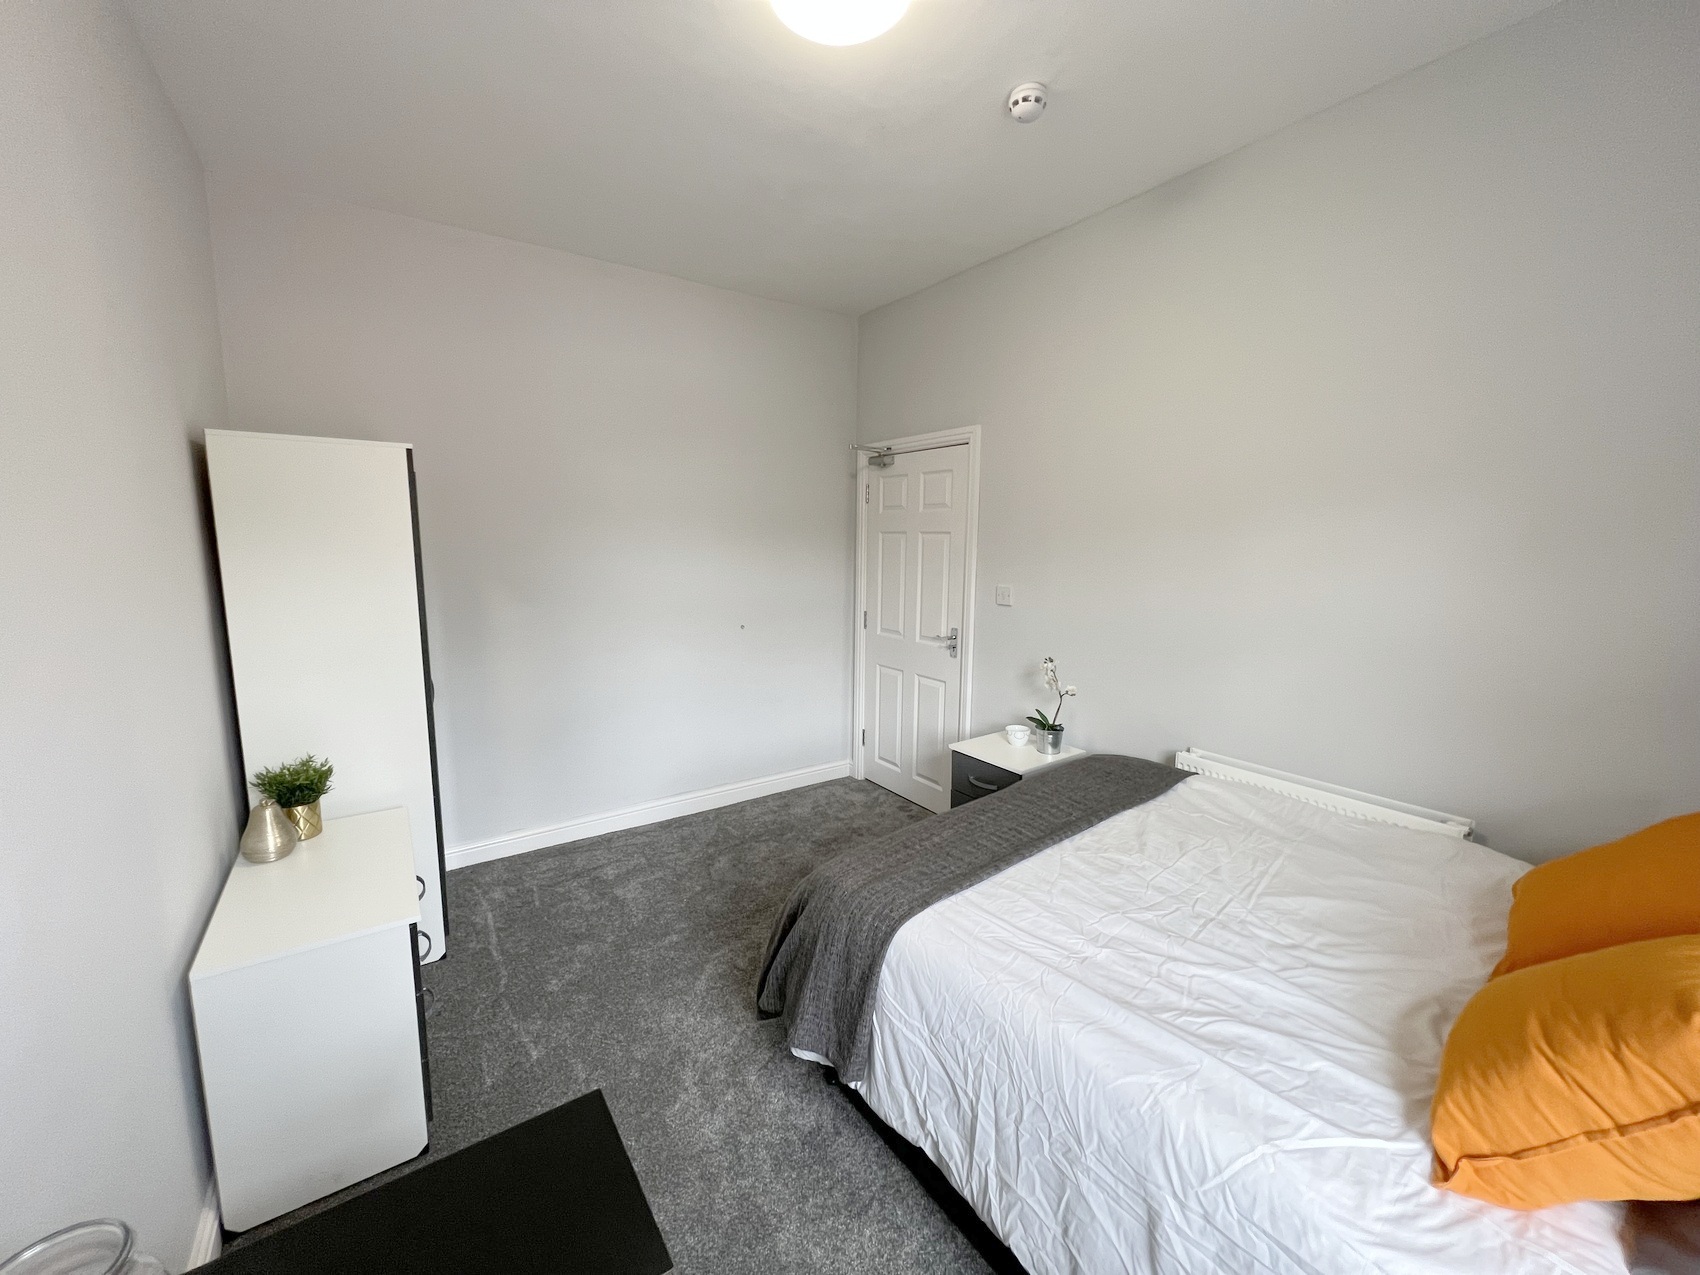 Luxurious Brand NEW Rooms Near Moseley Village! – Room 4